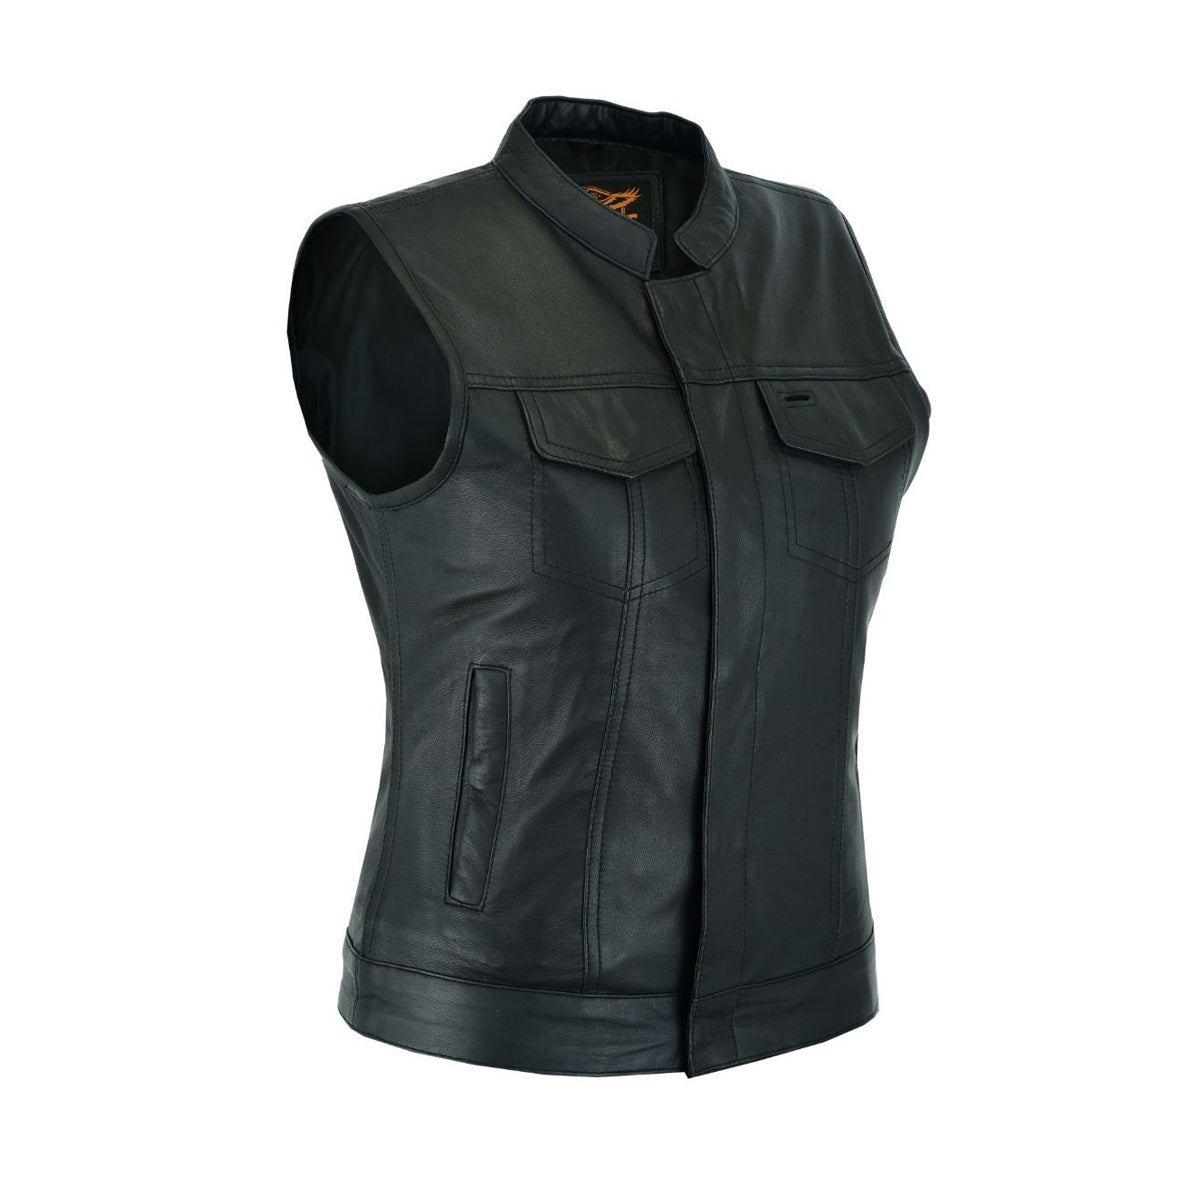 Ladies Motorcycle Leather CLUB VEST Butter Soft Thick Leather